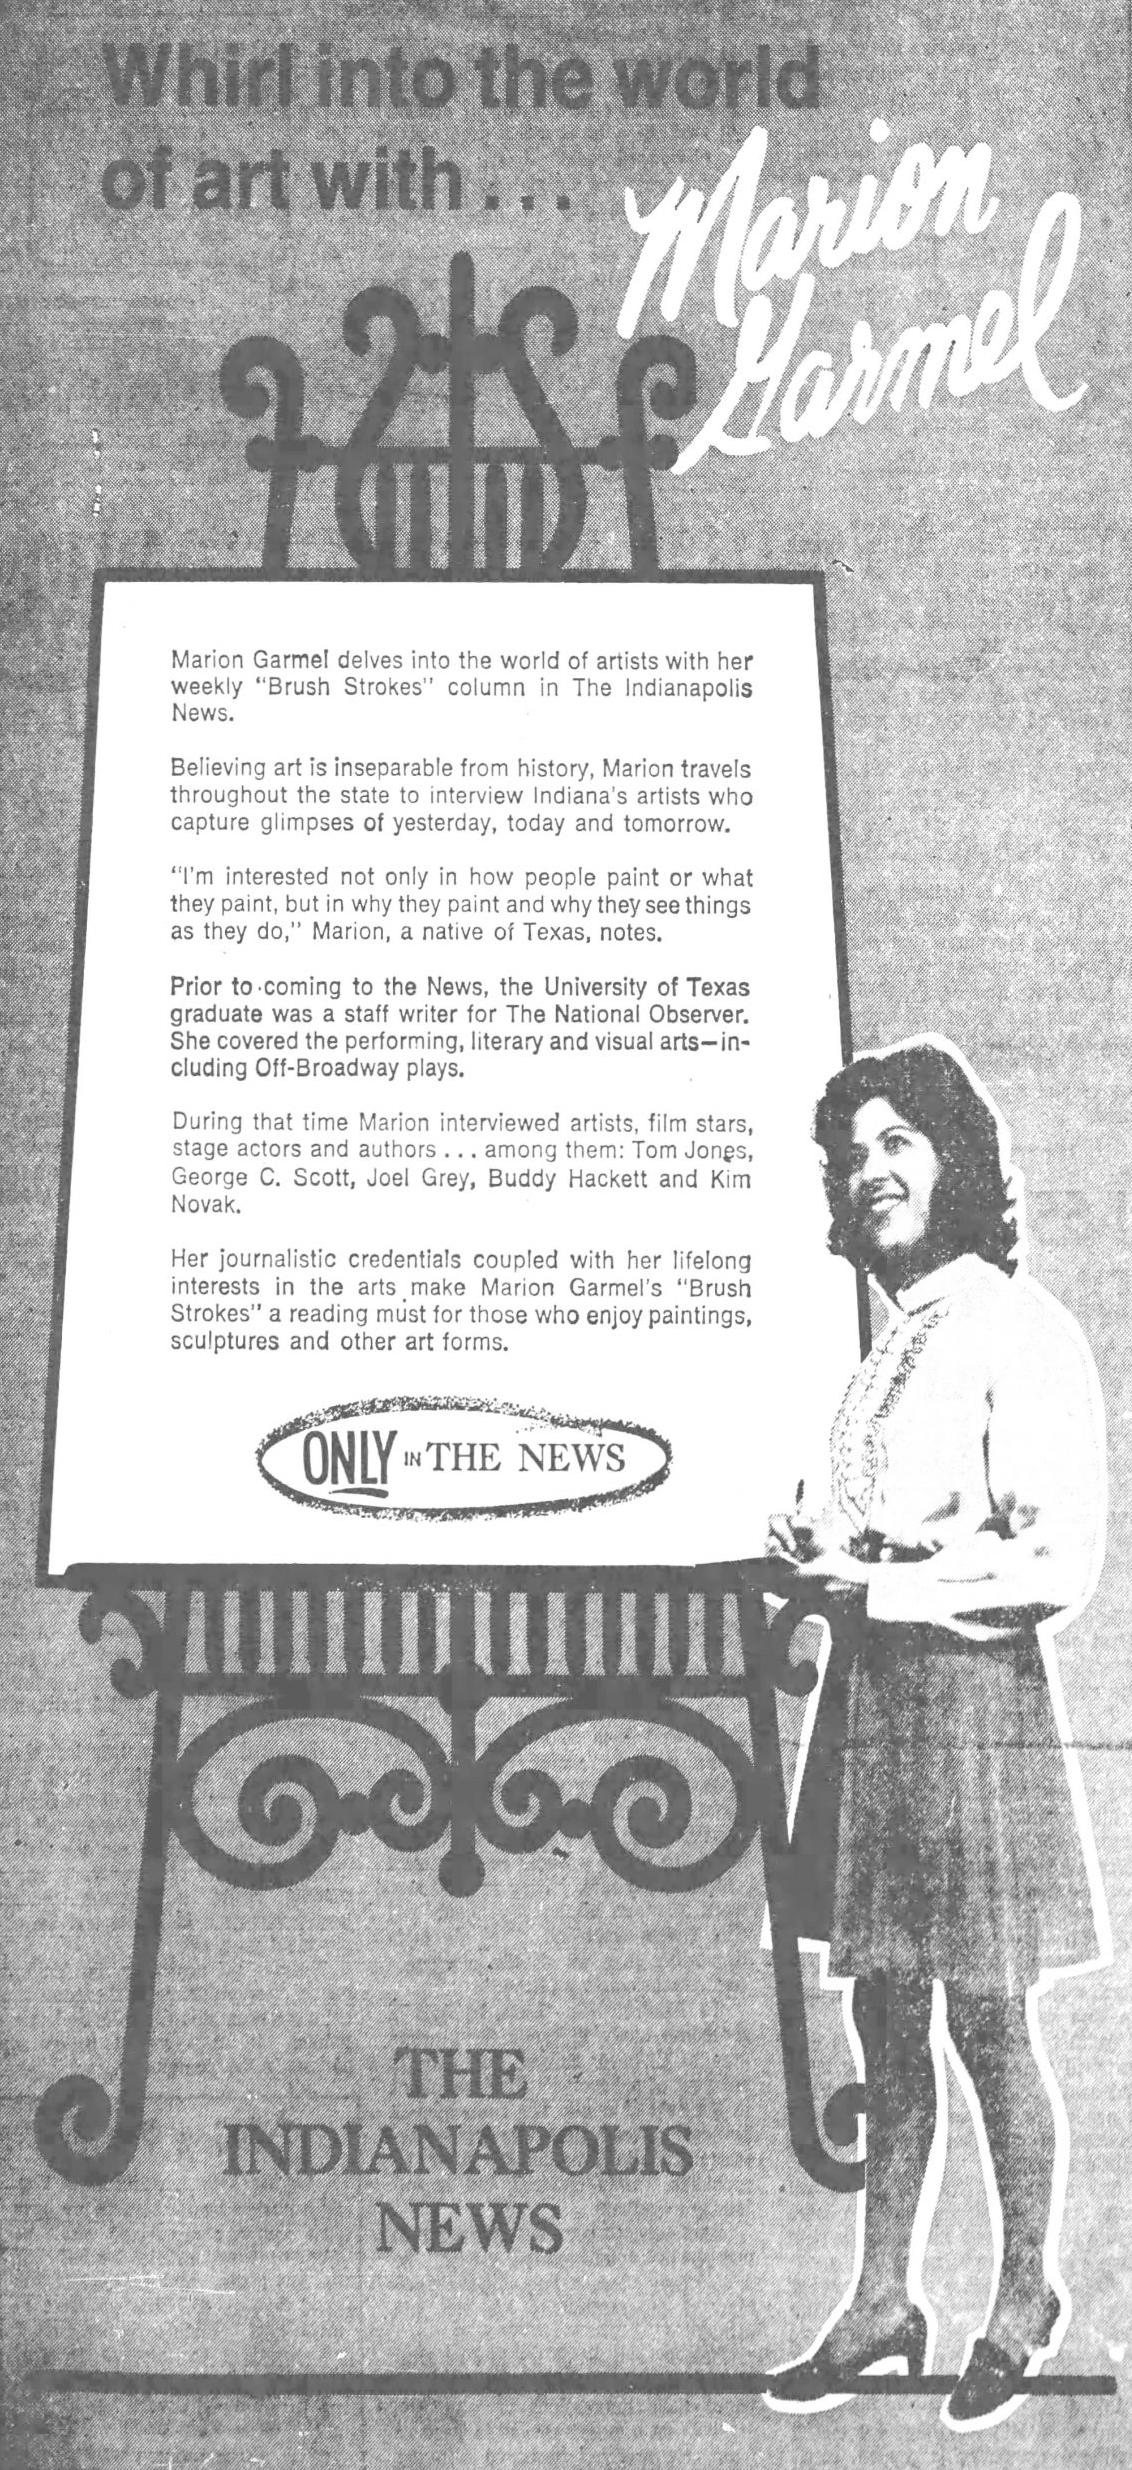 The advertisement shows a woman standing next to an over-sized easel. Above the easel is "Whirl into the world of art with...Marian Garmel."